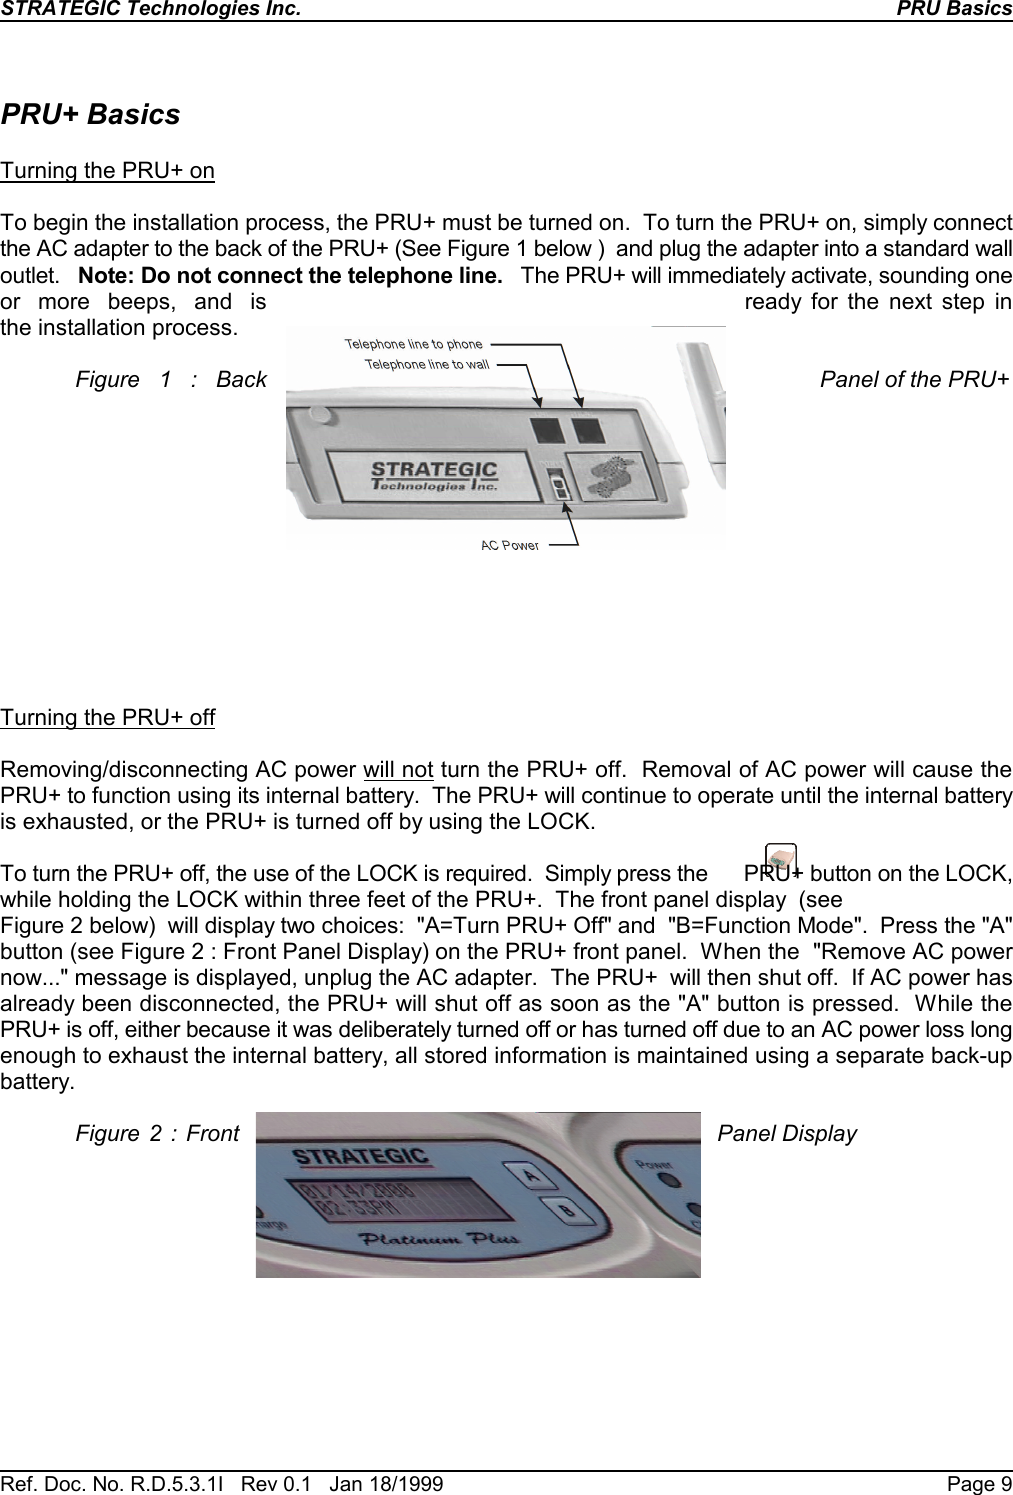 STRATEGIC Technologies Inc.Ref. Doc. No. R.D.5.3.1I   Rev 0.1   Jan 18/1999PRU BasicsPage 9PRU+ BasicsTurning the PRU+ onTo begin the installation process, the PRU+ must be turned on.  To turn the PRU+ on, simply connectthe AC adapter to the back of the PRU+ (See Figure 1 below )  and plug the adapter into a standard walloutlet.   Note: Do not connect the telephone line.   The PRU+ will immediately activate, sounding oneor  more  beeps,  and  is ready for the next step inthe installation process.Figure 1 : Back Panel of the PRU+Turning the PRU+ offRemoving/disconnecting AC power will not turn the PRU+ off.  Removal of AC power will cause thePRU+ to function using its internal battery.  The PRU+ will continue to operate until the internal batteryis exhausted, or the PRU+ is turned off by using the LOCK.To turn the PRU+ off, the use of the LOCK is required.  Simply press the      PRU+ button on the LOCK,while holding the LOCK within three feet of the PRU+.  The front panel display  (seeFigure 2 below)  will display two choices:  &quot;A=Turn PRU+ Off&quot; and  &quot;B=Function Mode&quot;.  Press the &quot;A&quot;button (see Figure 2 : Front Panel Display) on the PRU+ front panel.  When the  &quot;Remove AC powernow...&quot; message is displayed, unplug the AC adapter.  The PRU+  will then shut off.  If AC power hasalready been disconnected, the PRU+ will shut off as soon as the &quot;A&quot; button is pressed.  While thePRU+ is off, either because it was deliberately turned off or has turned off due to an AC power loss longenough to exhaust the internal battery, all stored information is maintained using a separate back-upbattery.Figure 2 : Front Panel Display